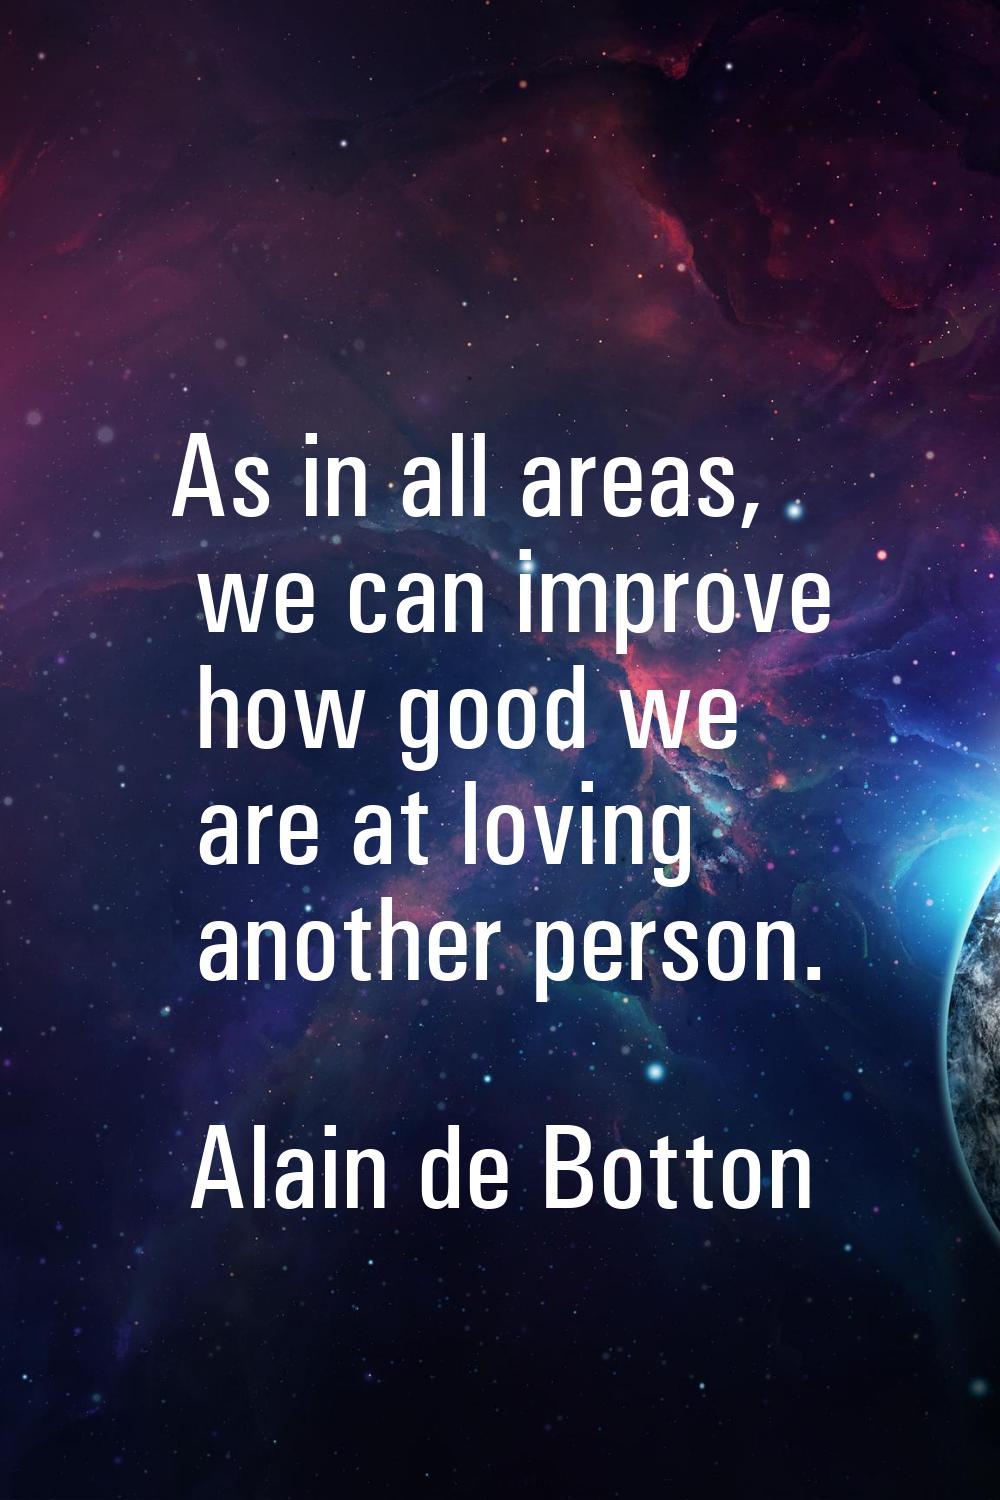 As in all areas, we can improve how good we are at loving another person.